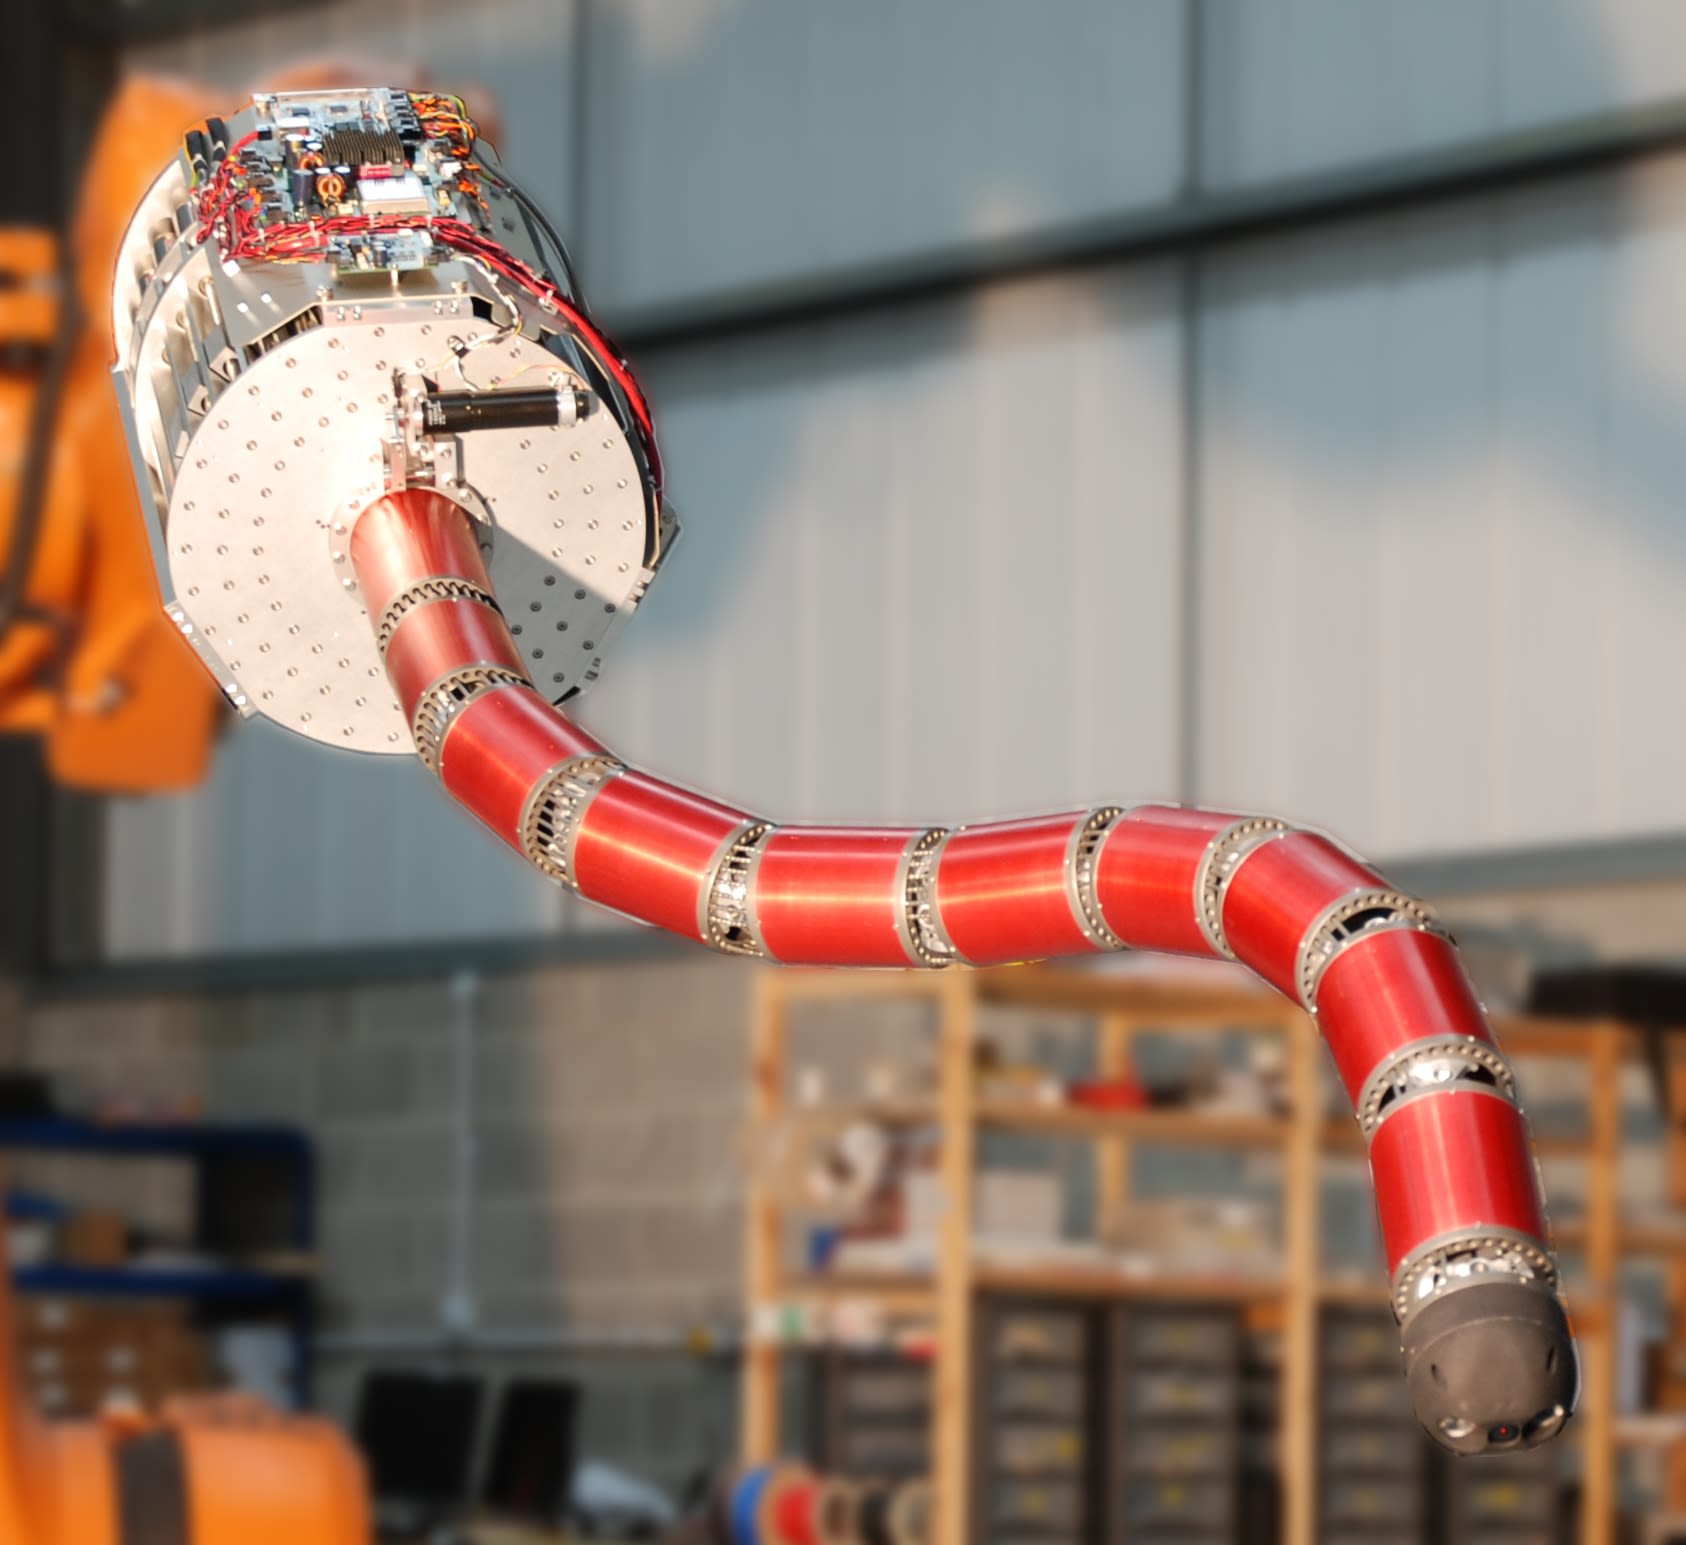 CMU's snake robot explores defunct nuclear power plant